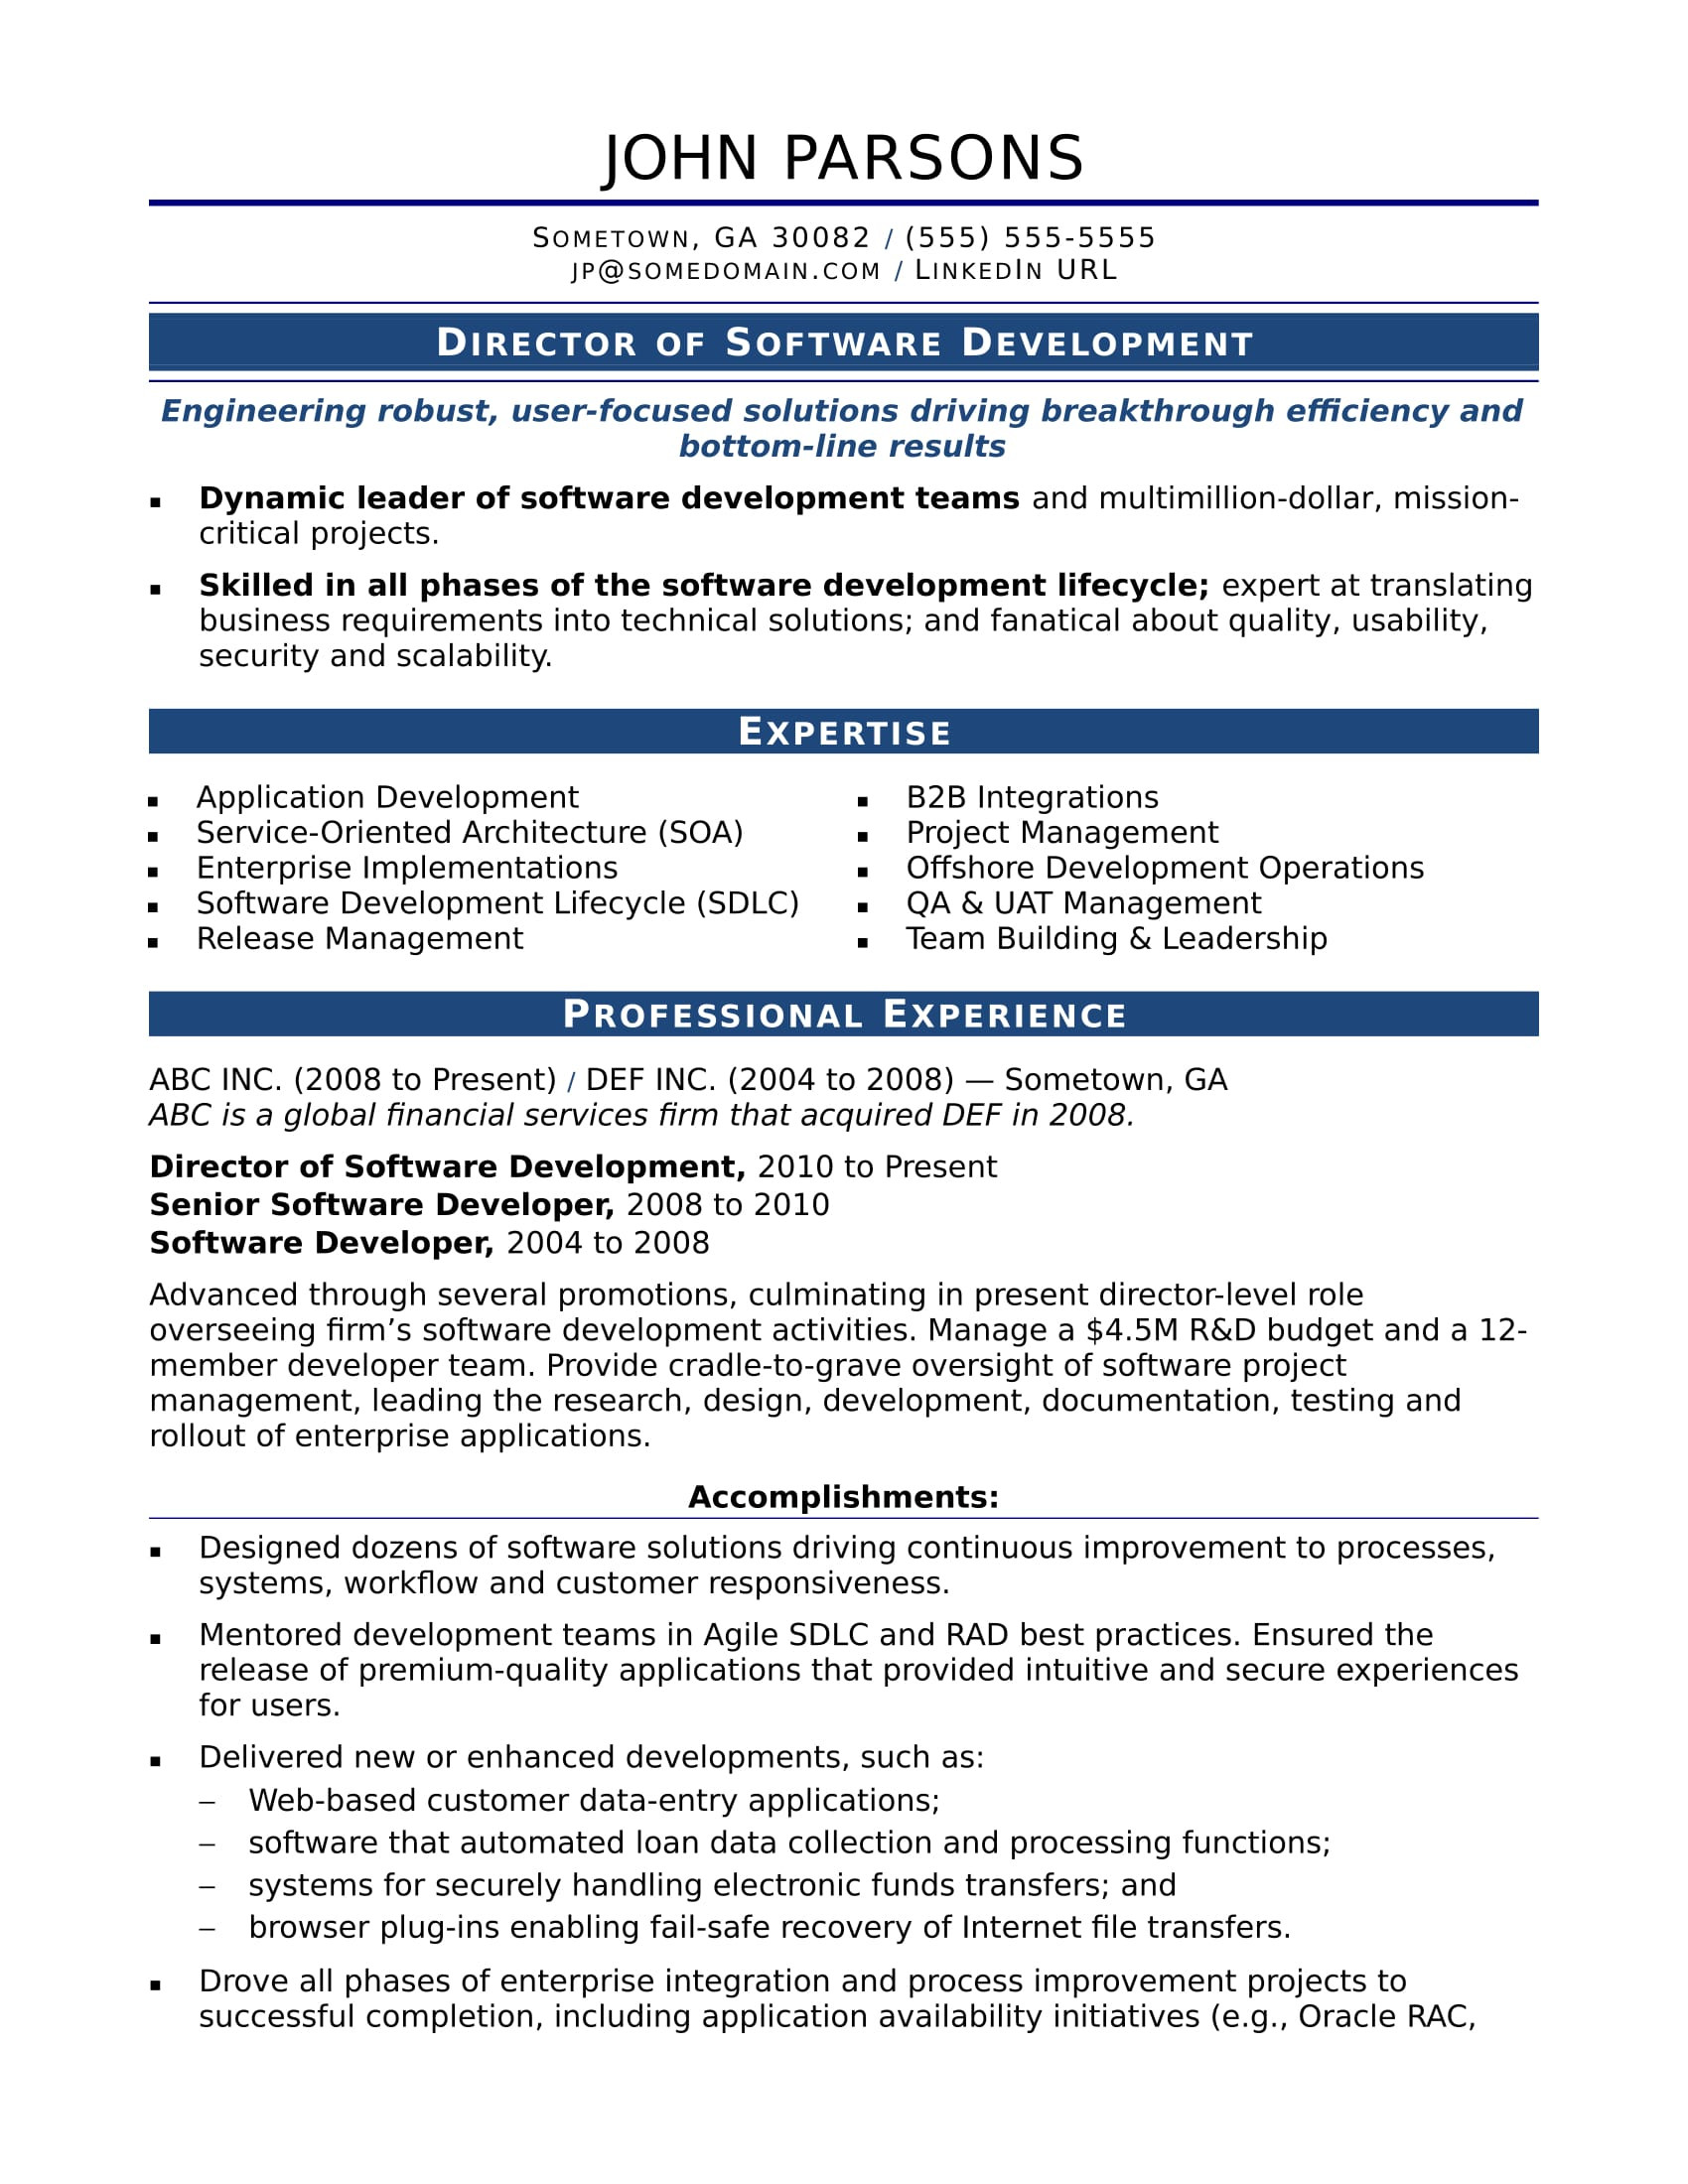 Professional 8years Experience It Resumes Samples Sample Resume for An Experienced It Developer Monster.com